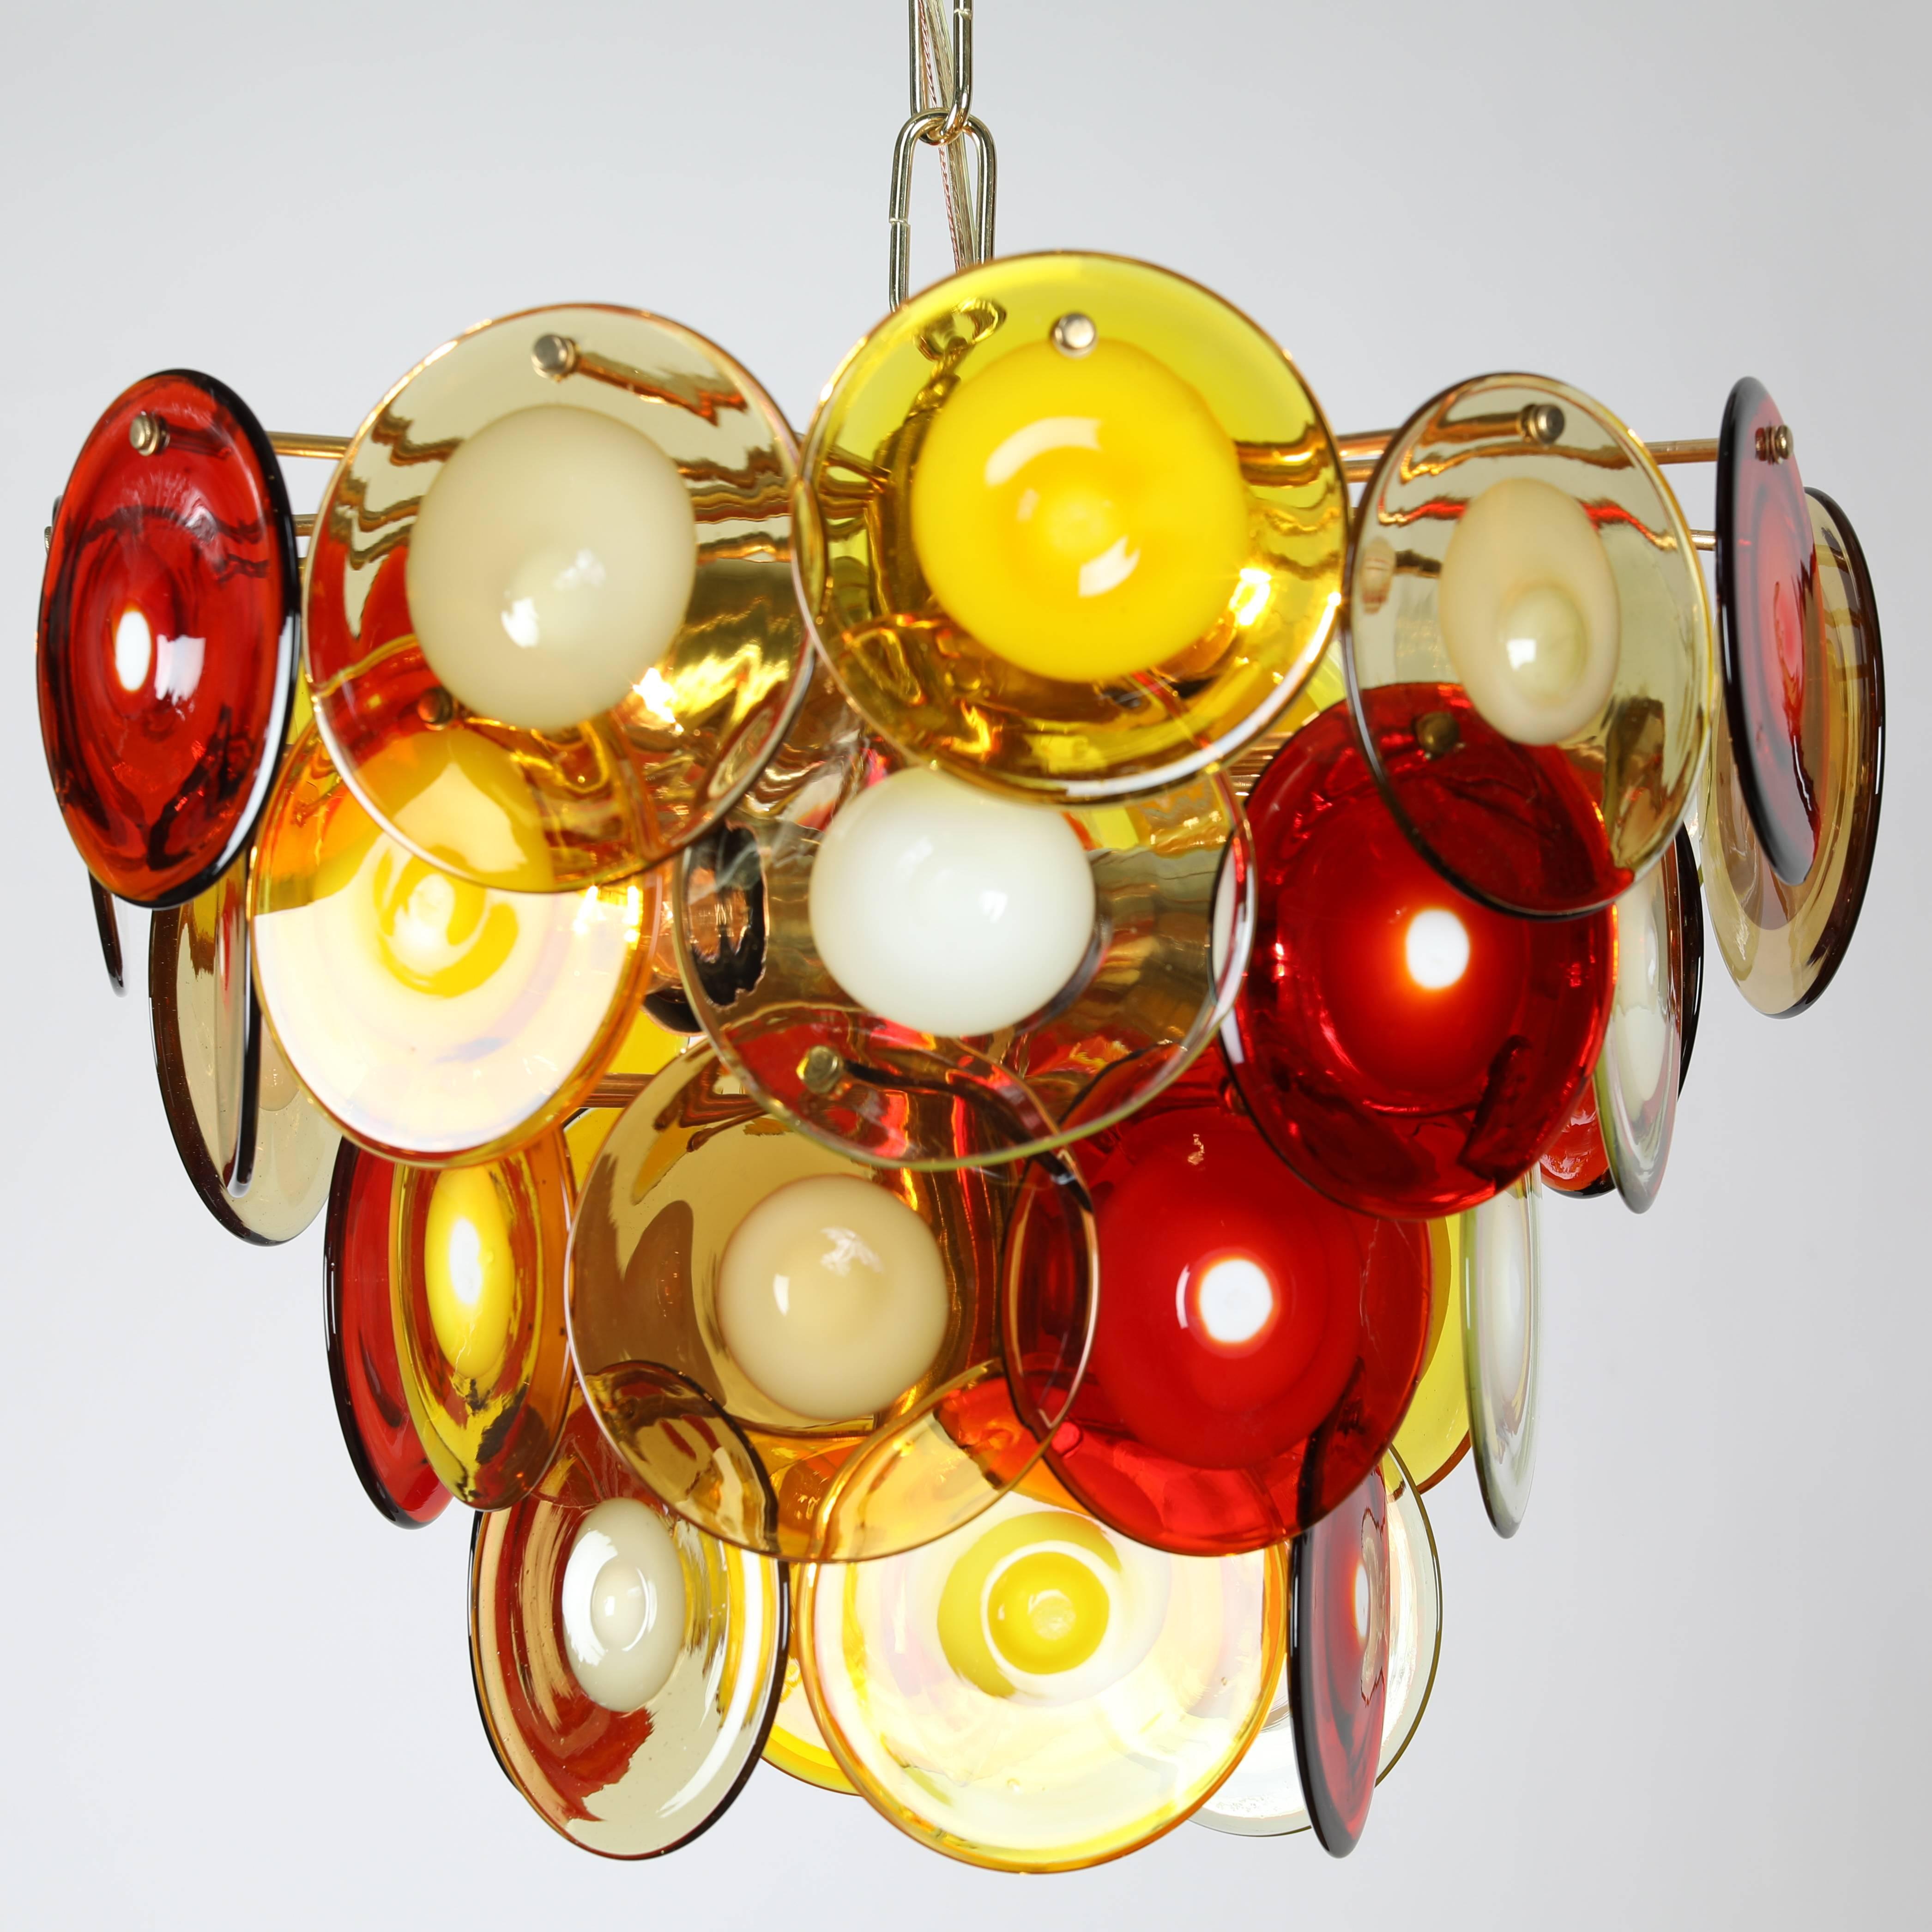 Colorful chandelier featuring 36 round hand-blown glass disks in red, yellow and white glass in a cascading formation. Takes four standard-base bulbs plus a single candelabra bulb. New wiring and sockets; new brass chain and canopy. 36